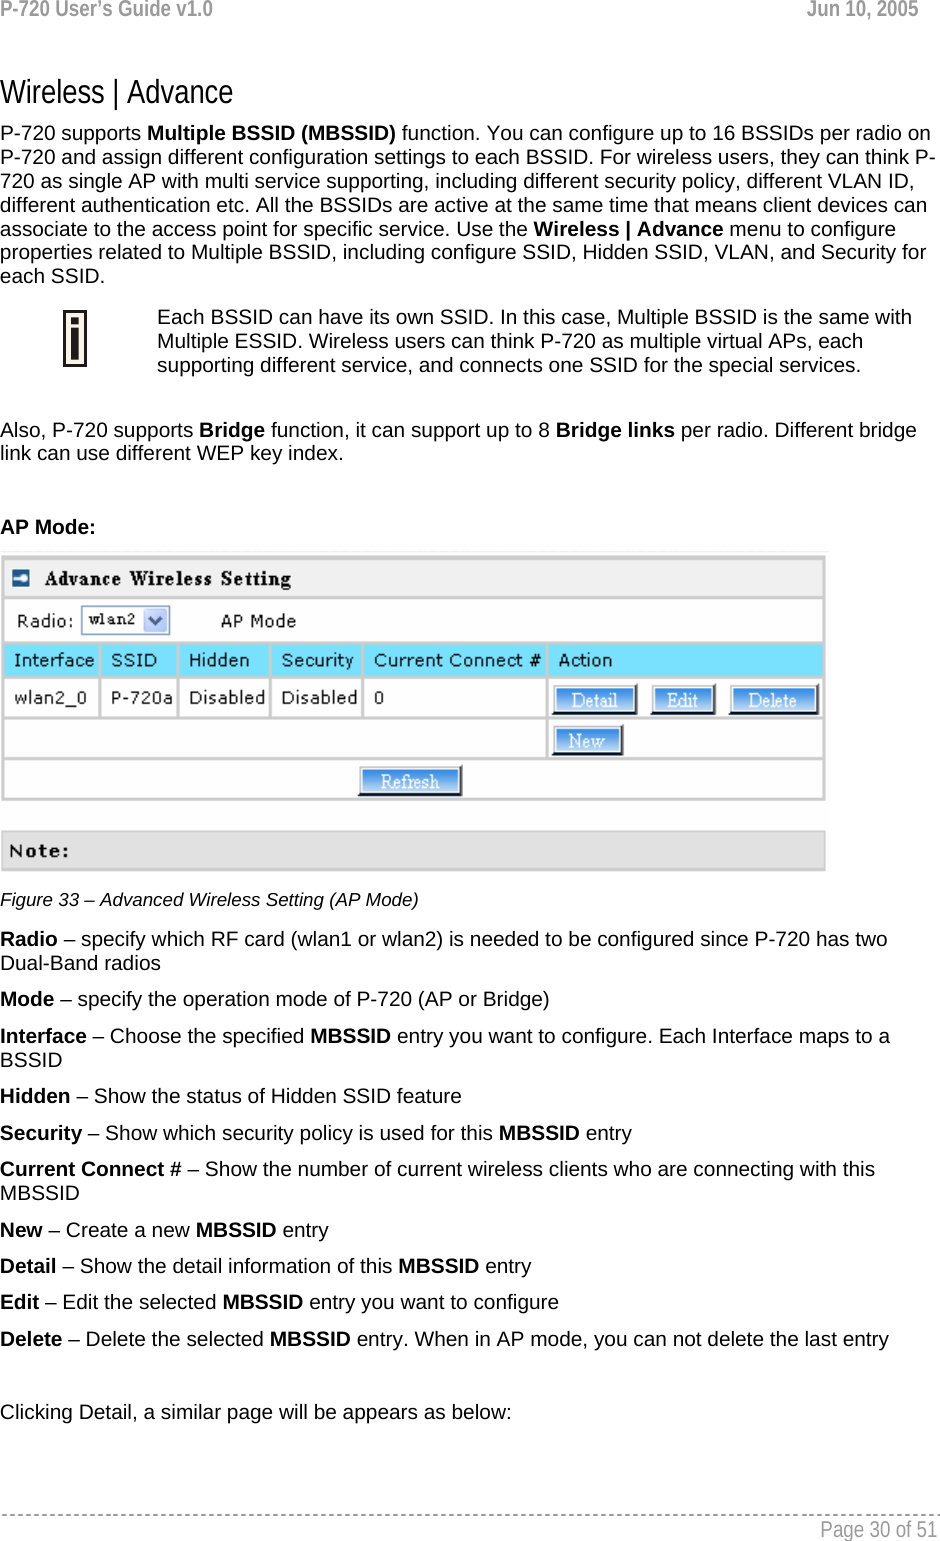 P-720 User’s Guide v1.0  Jun 10, 2005     Page 30 of 51   Wireless | Advance  P-720 supports Multiple BSSID (MBSSID) function. You can configure up to 16 BSSIDs per radio on P-720 and assign different configuration settings to each BSSID. For wireless users, they can think P-720 as single AP with multi service supporting, including different security policy, different VLAN ID, different authentication etc. All the BSSIDs are active at the same time that means client devices can associate to the access point for specific service. Use the Wireless | Advance menu to configure properties related to Multiple BSSID, including configure SSID, Hidden SSID, VLAN, and Security for each SSID.  Each BSSID can have its own SSID. In this case, Multiple BSSID is the same with Multiple ESSID. Wireless users can think P-720 as multiple virtual APs, each supporting different service, and connects one SSID for the special services.   Also, P-720 supports Bridge function, it can support up to 8 Bridge links per radio. Different bridge link can use different WEP key index.   AP Mode:  Figure 33 – Advanced Wireless Setting (AP Mode) Radio – specify which RF card (wlan1 or wlan2) is needed to be configured since P-720 has two Dual-Band radios Mode – specify the operation mode of P-720 (AP or Bridge) Interface – Choose the specified MBSSID entry you want to configure. Each Interface maps to a BSSID Hidden – Show the status of Hidden SSID feature Security – Show which security policy is used for this MBSSID entry Current Connect # – Show the number of current wireless clients who are connecting with this MBSSID New – Create a new MBSSID entry Detail – Show the detail information of this MBSSID entry Edit – Edit the selected MBSSID entry you want to configure Delete – Delete the selected MBSSID entry. When in AP mode, you can not delete the last entry  Clicking Detail, a similar page will be appears as below: 